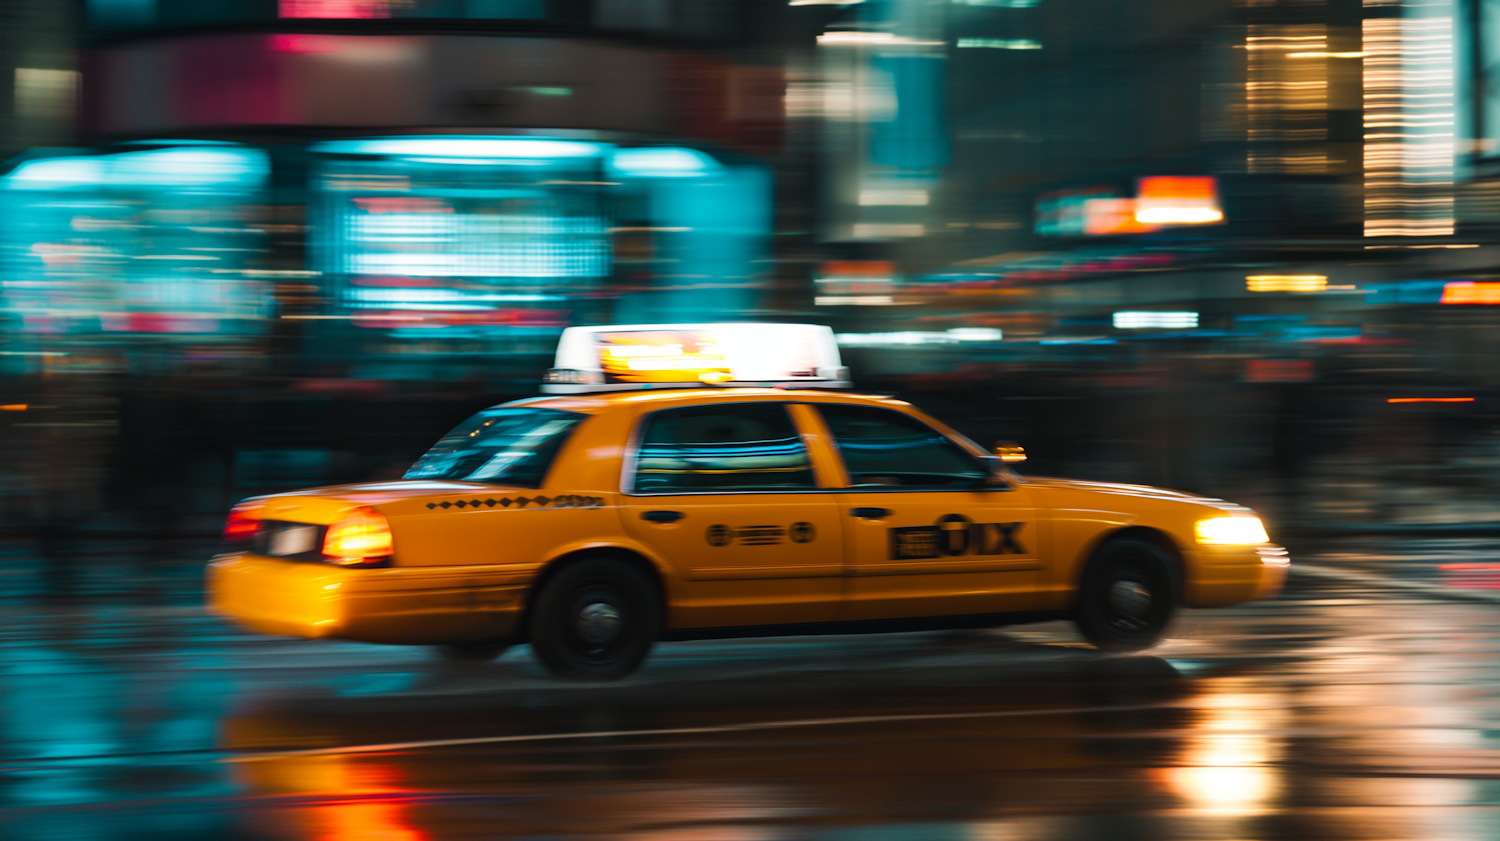 New York Nightscape: A Taxi in Motion